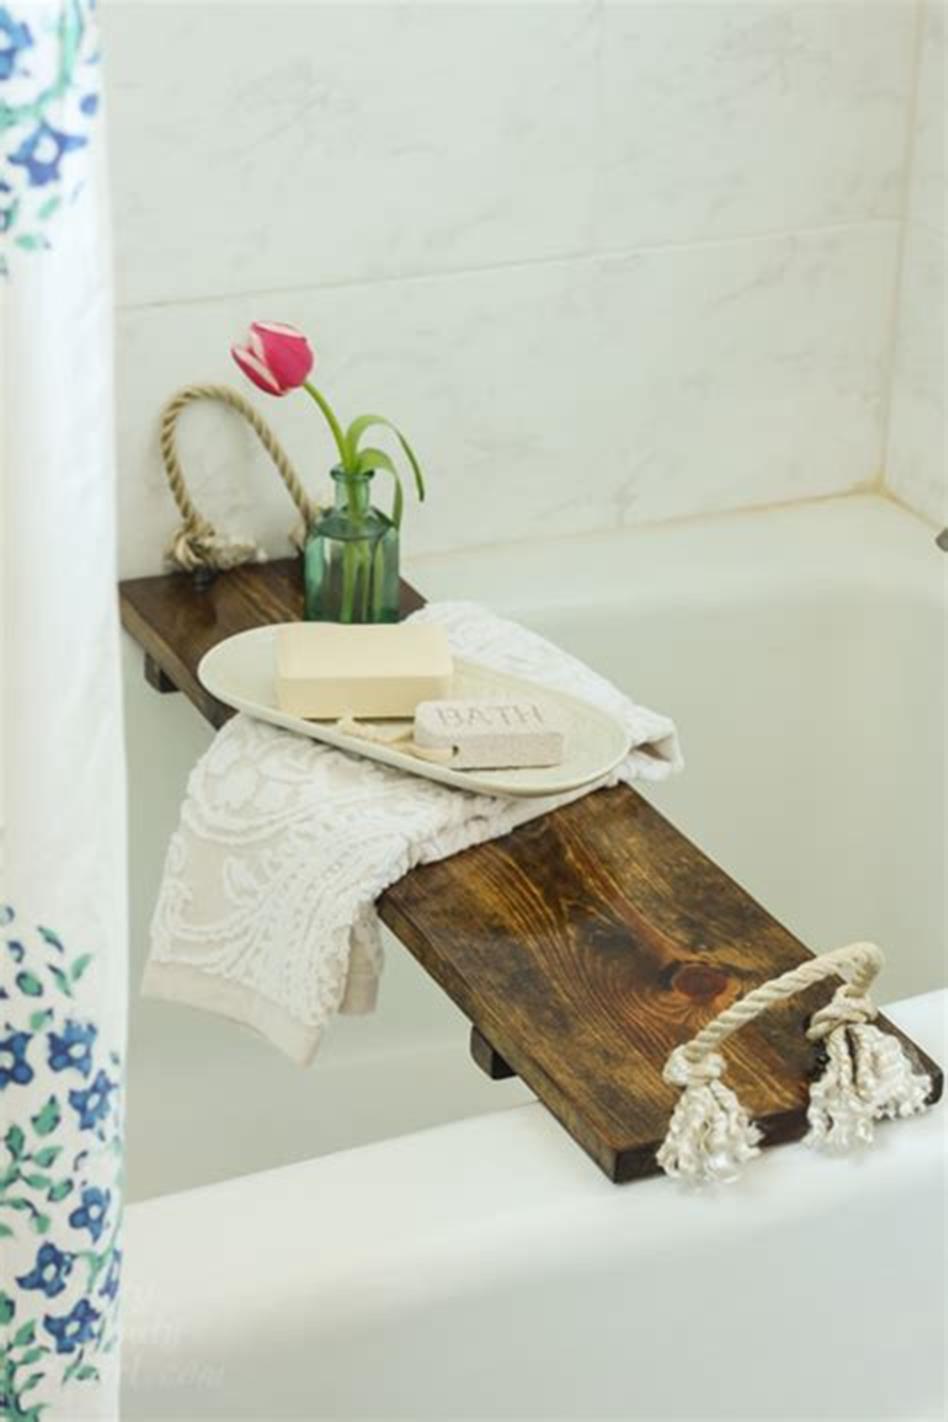 18. Wooden shelf in the interior of the bathroom